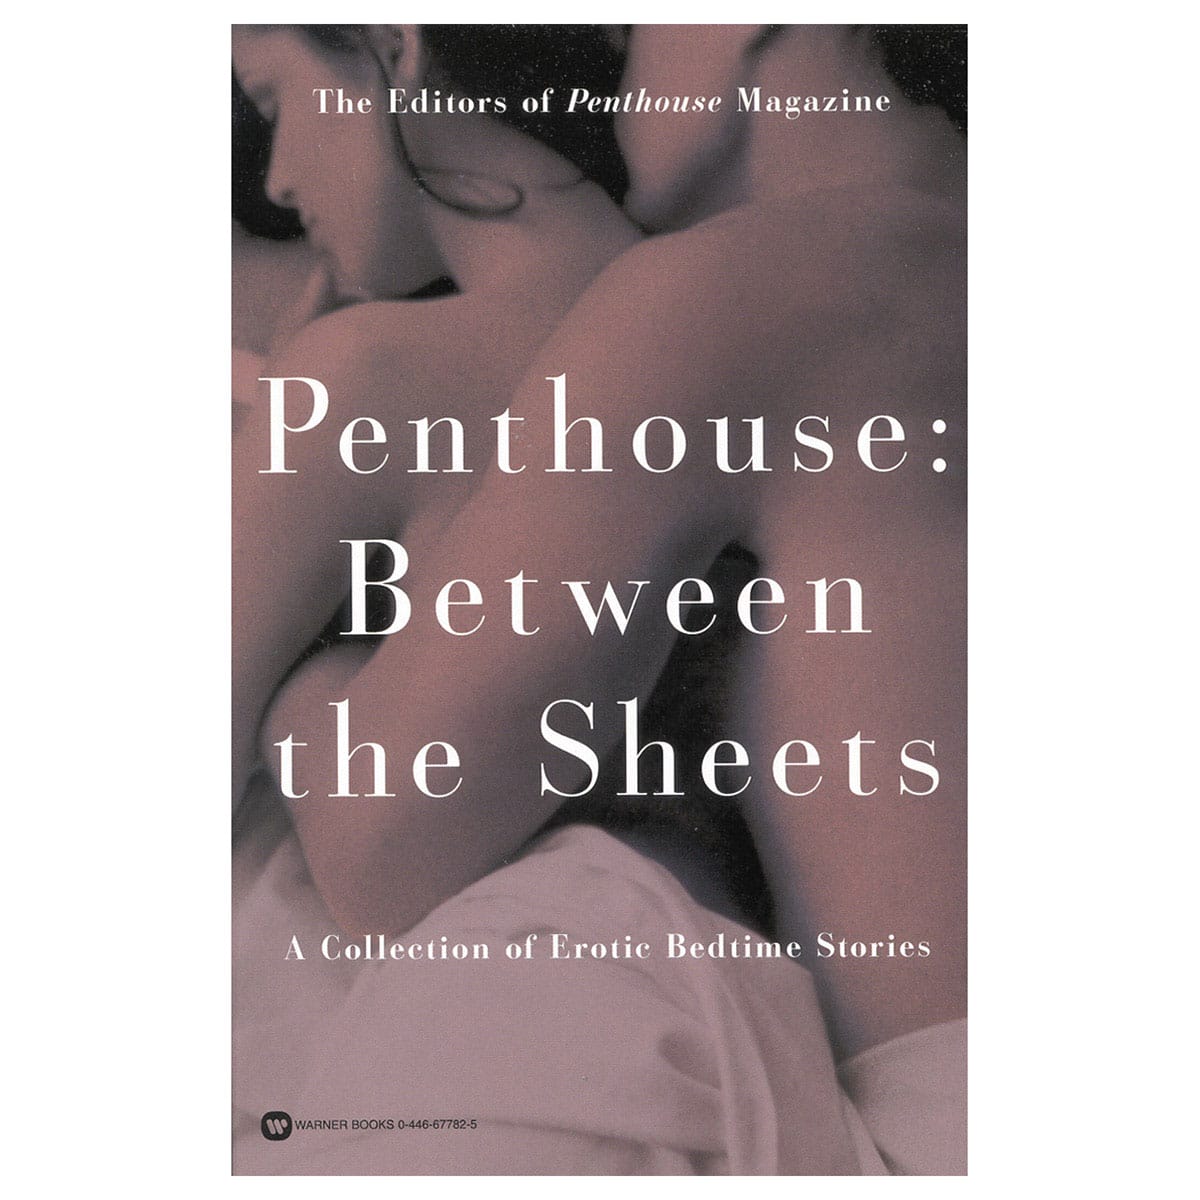 Buy A Collection of Erotic Bedtime Stories Penthouse Between the Sheets book for her.